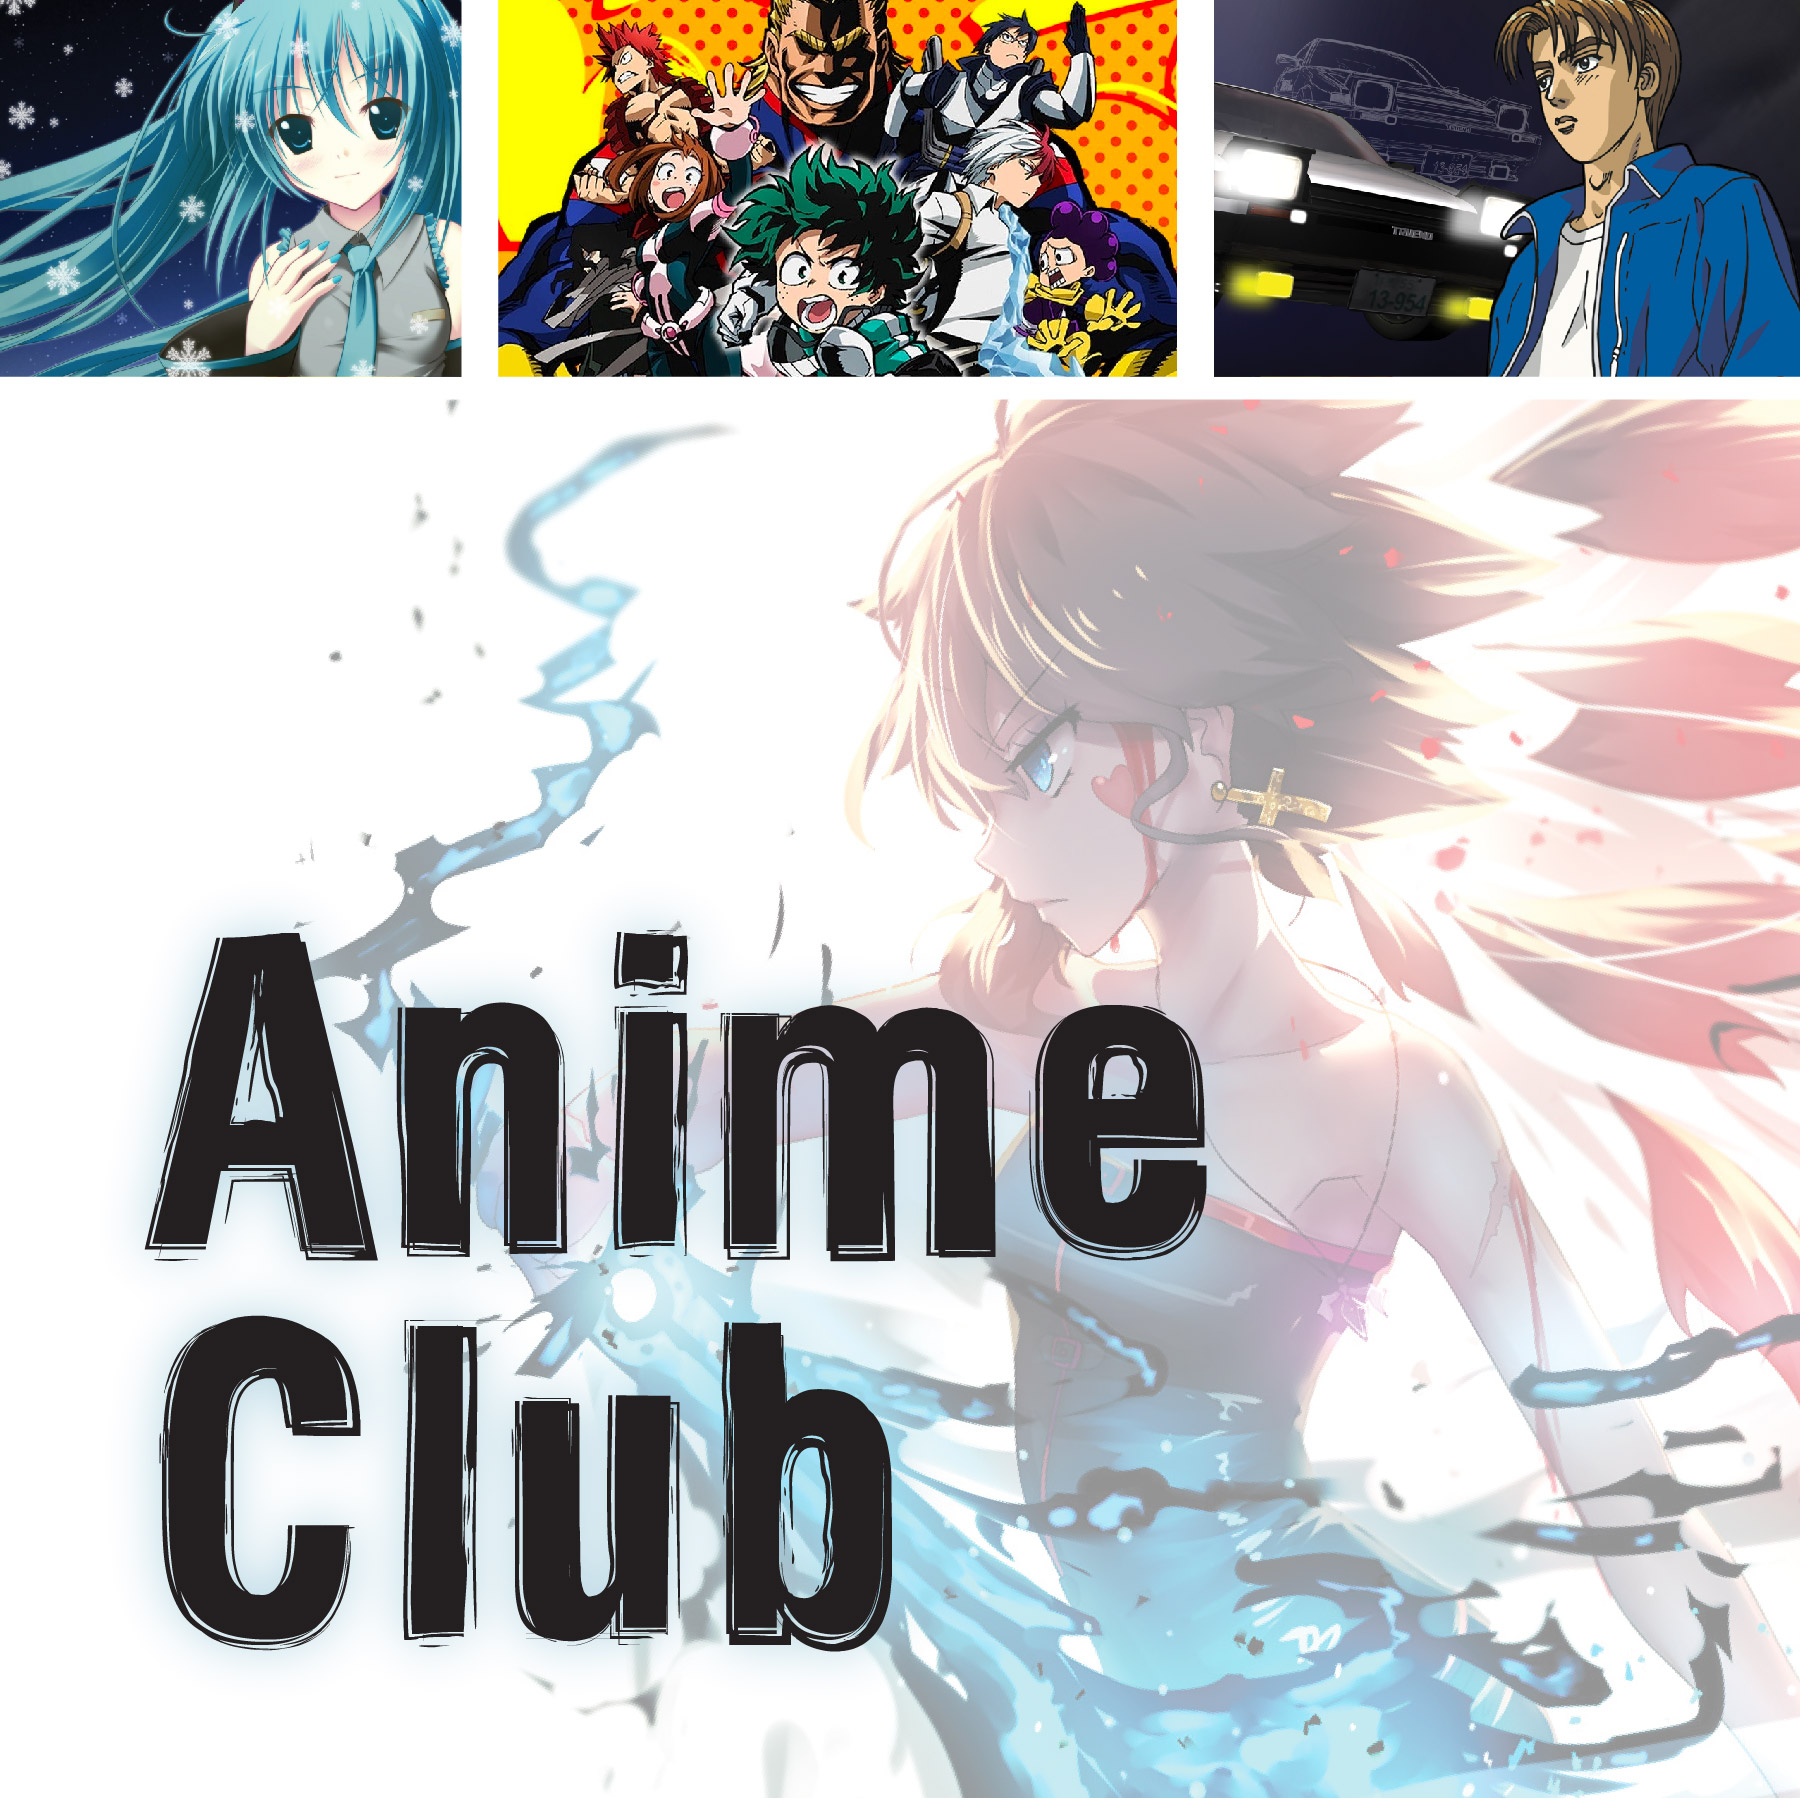 Anime Characters with "Anime Club" text